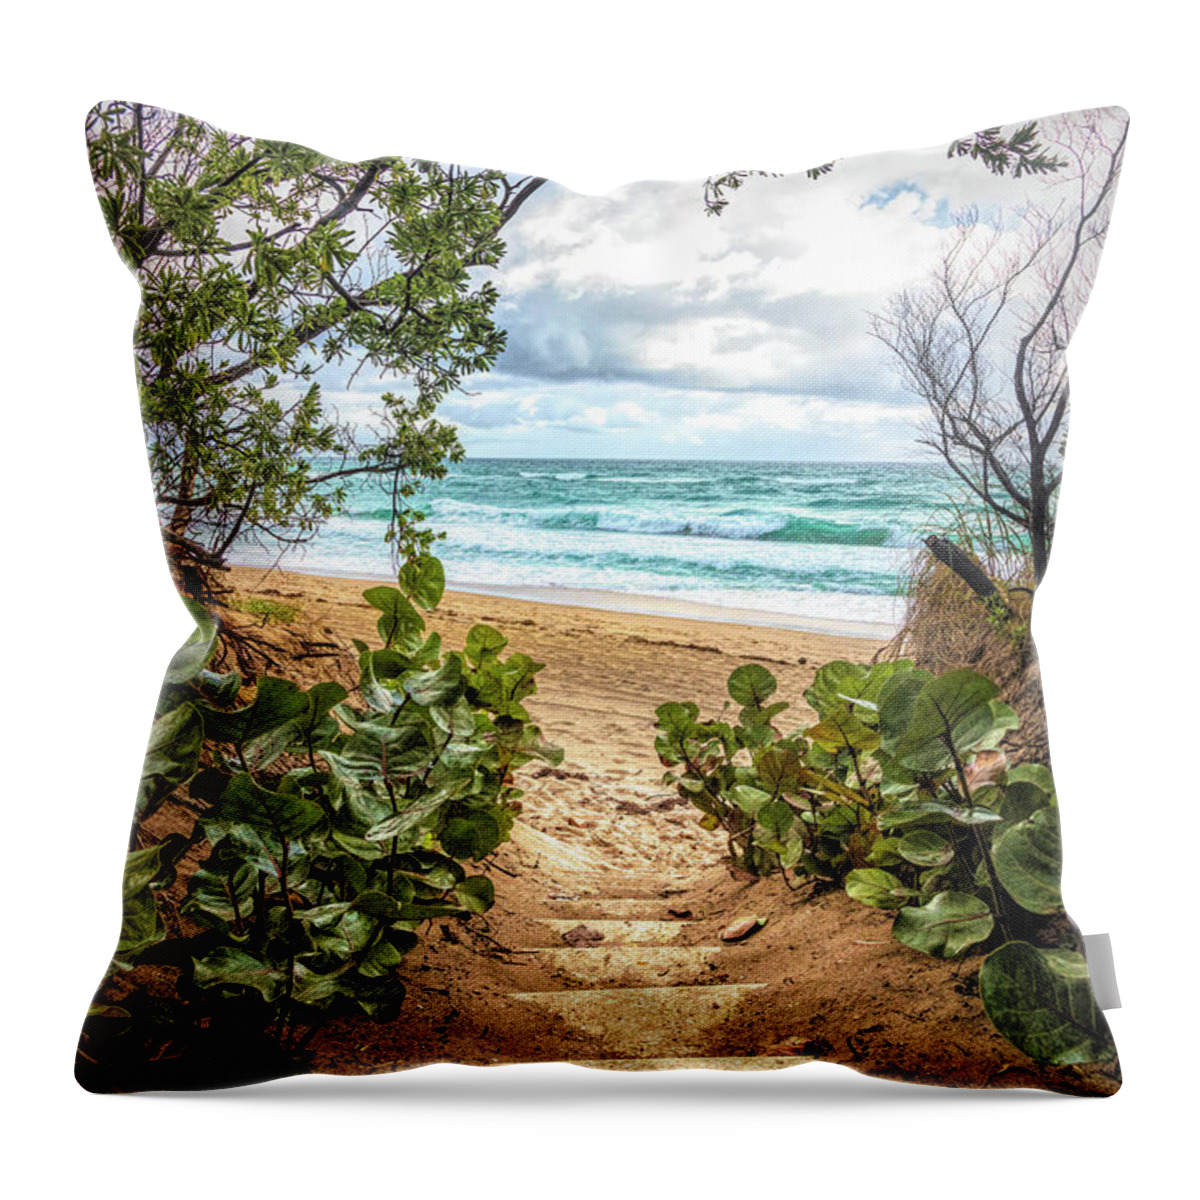 Clouds Throw Pillow featuring the photograph Step Down into Paradise by Debra and Dave Vanderlaan